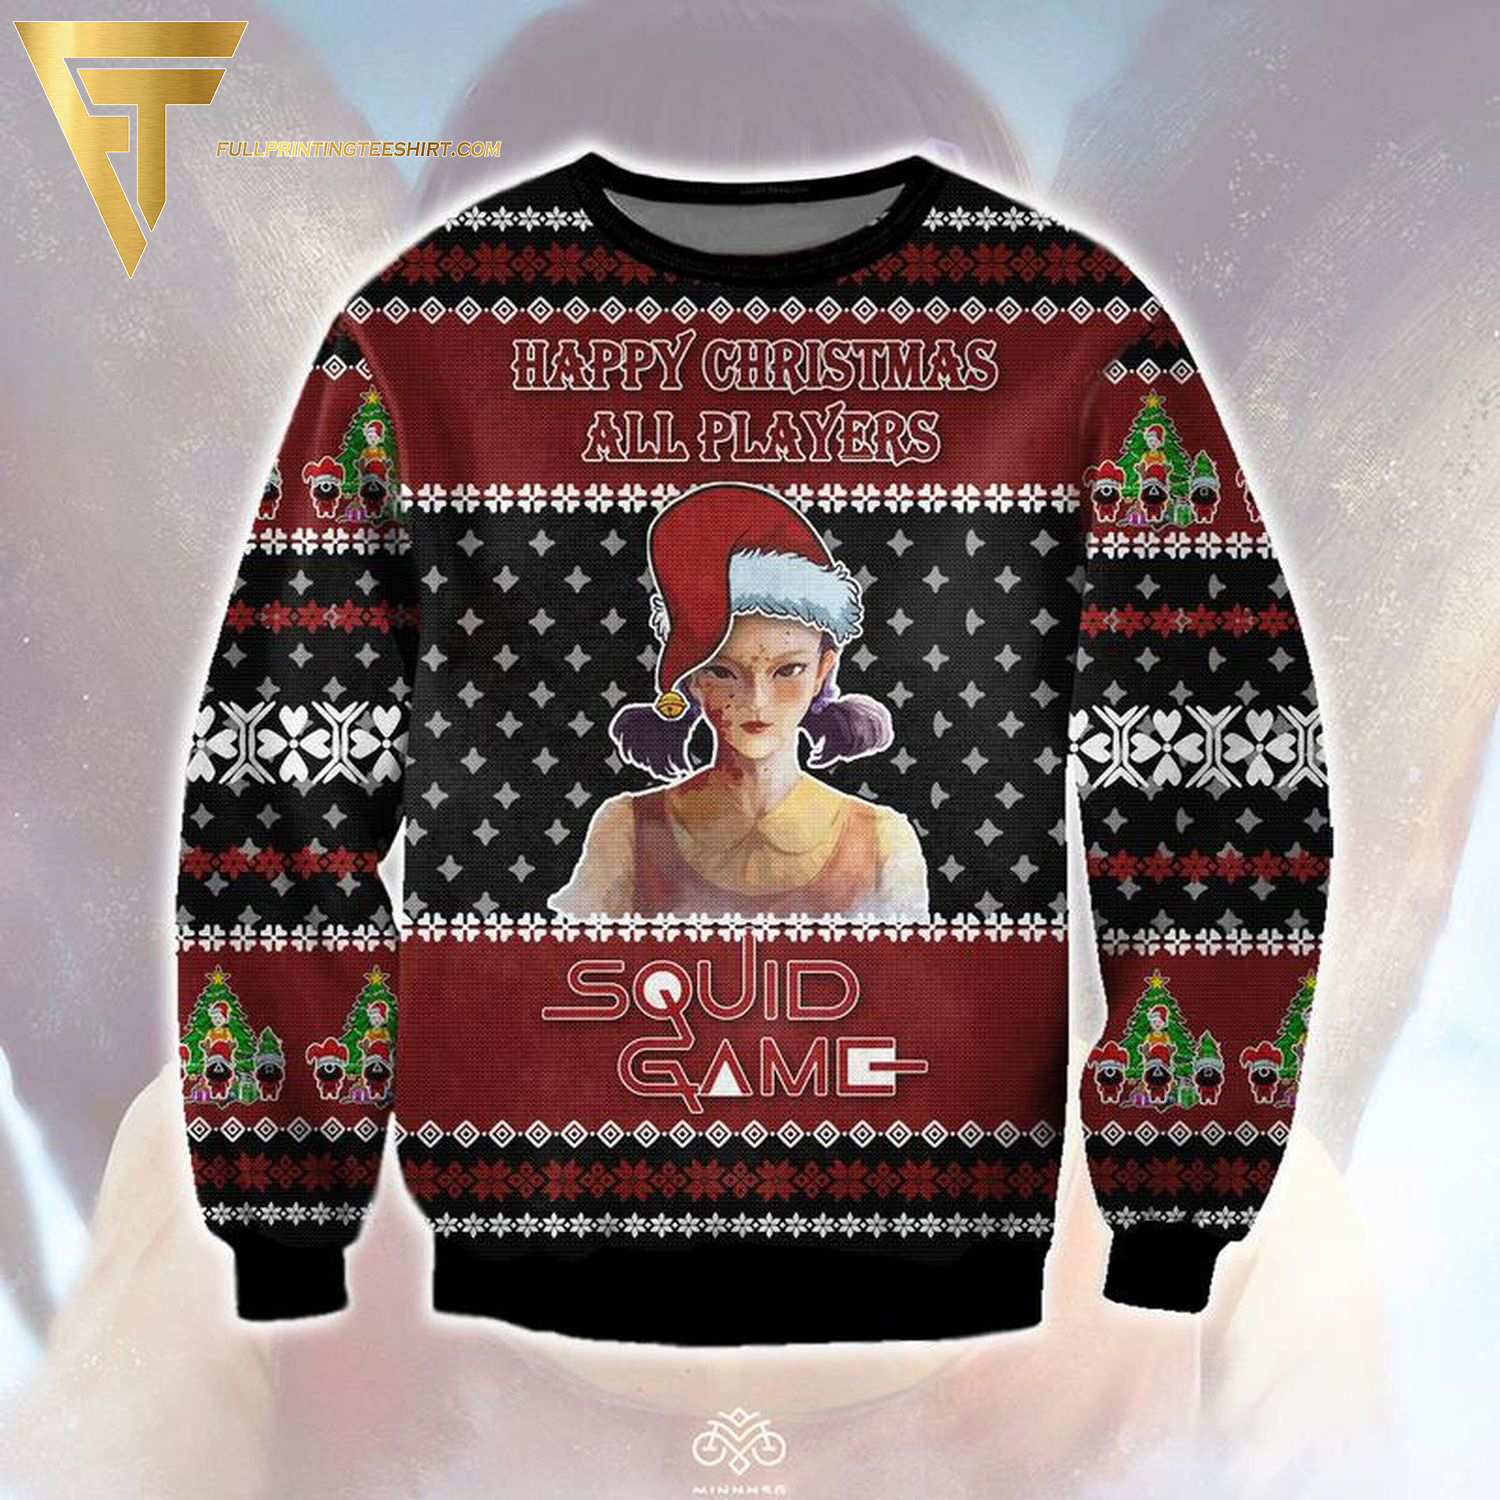 Squid Game Happy Christmas All Players Full Print Ugly Christmas Sweater - Copy